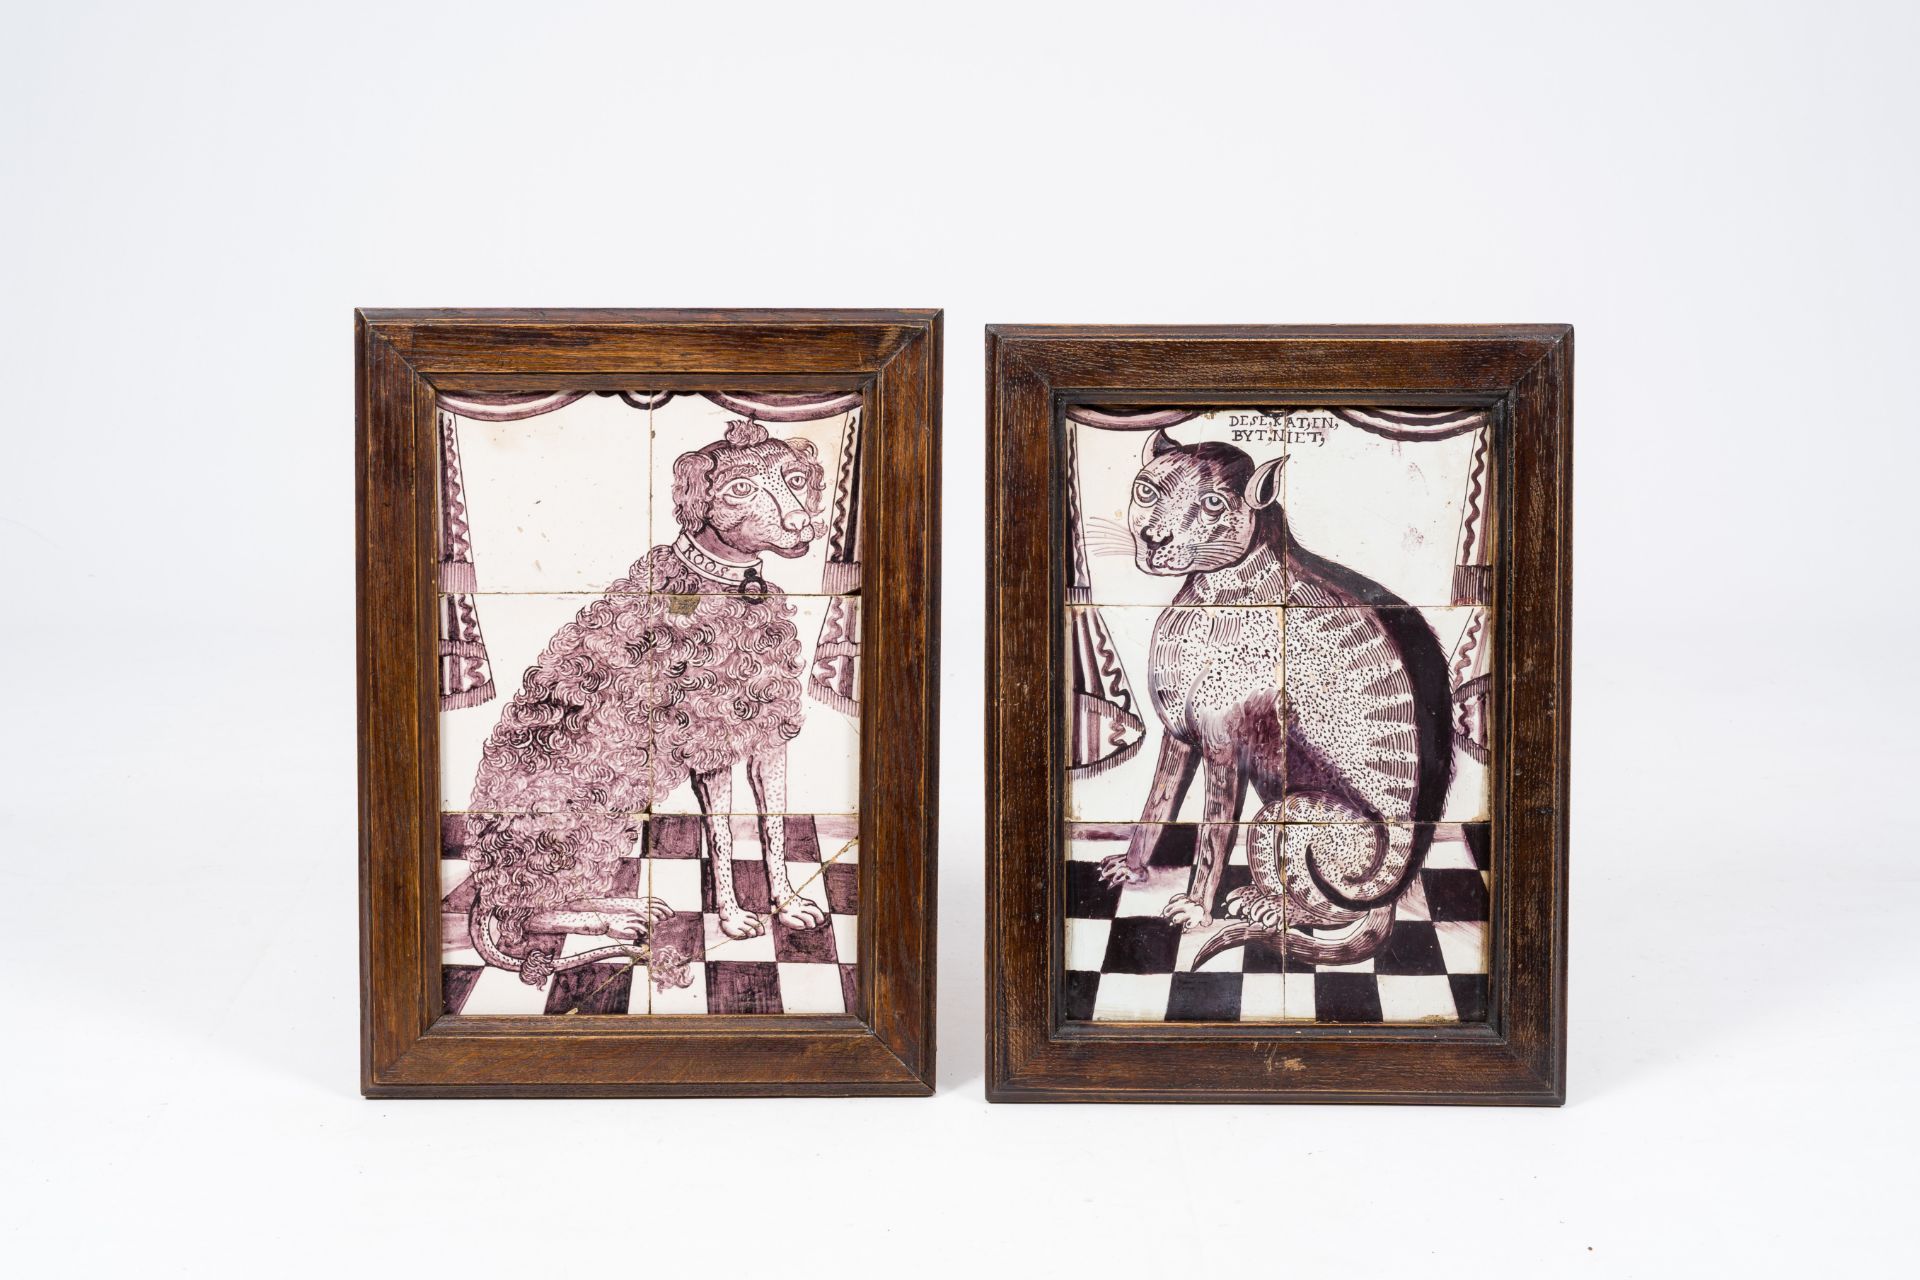 A pair of Dutch Delft manganese tile murals with a cat and a dog ('Roos'), 18th C.